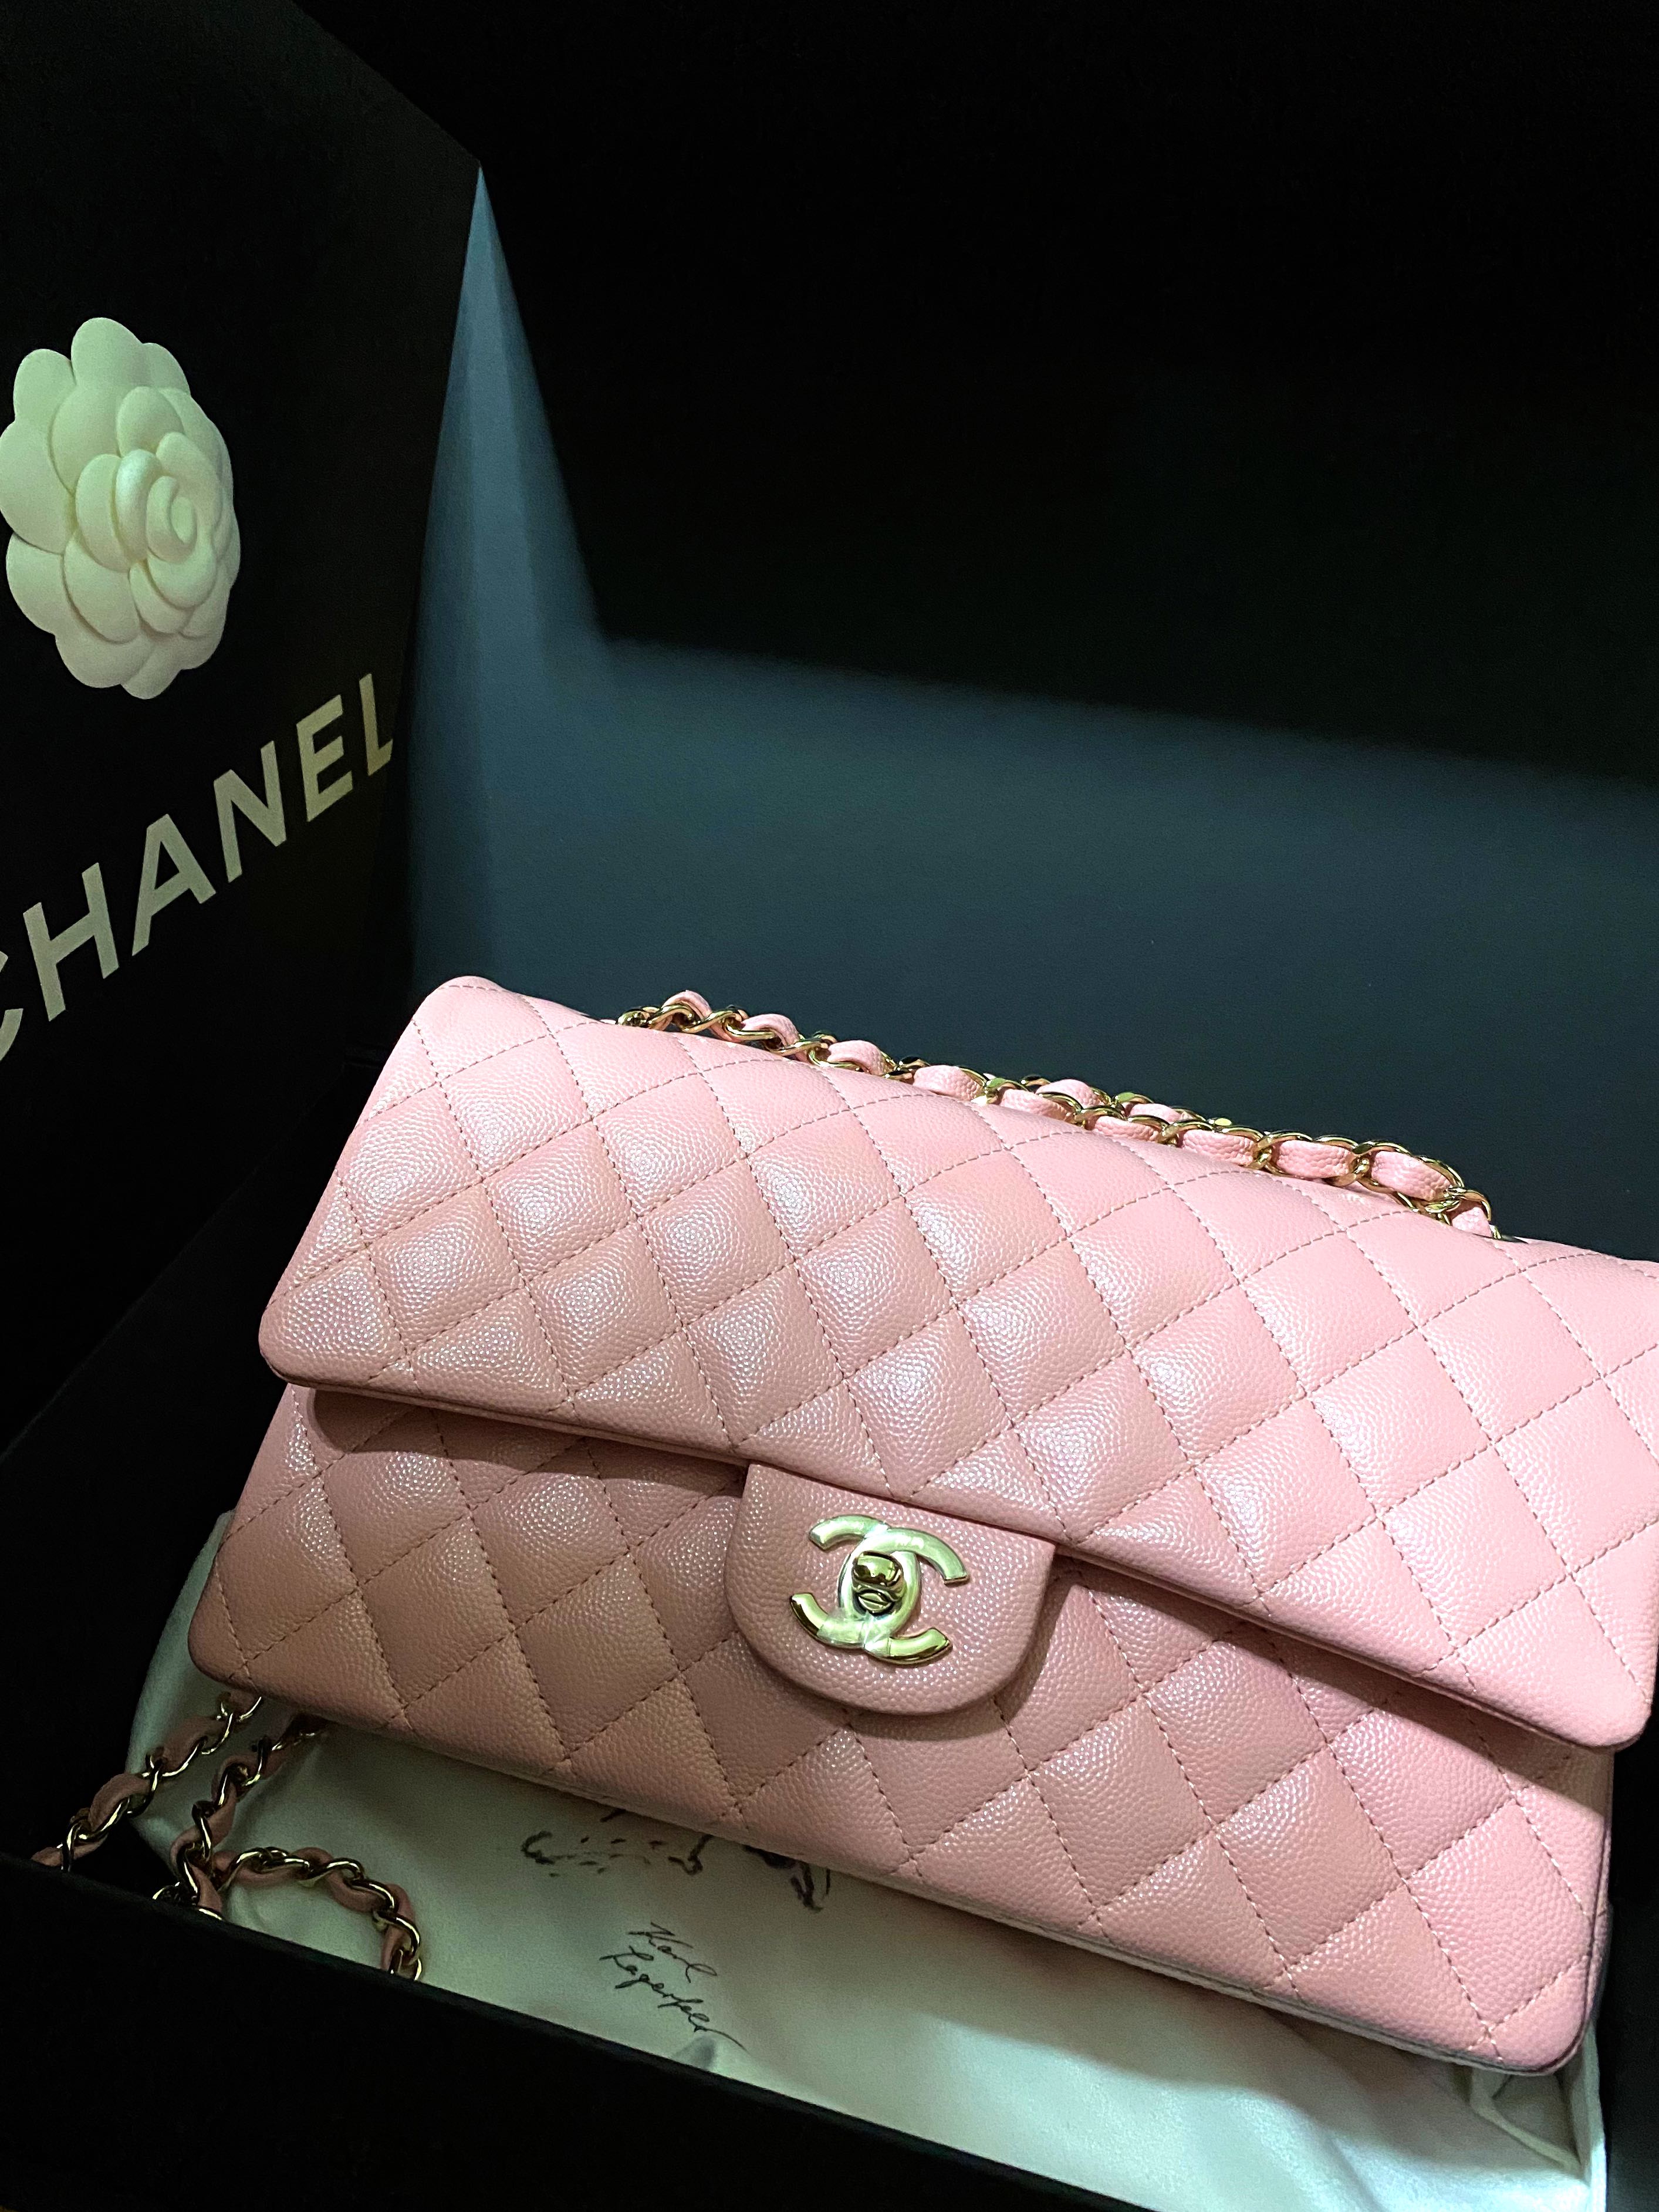 hot pink quilted chanel bag